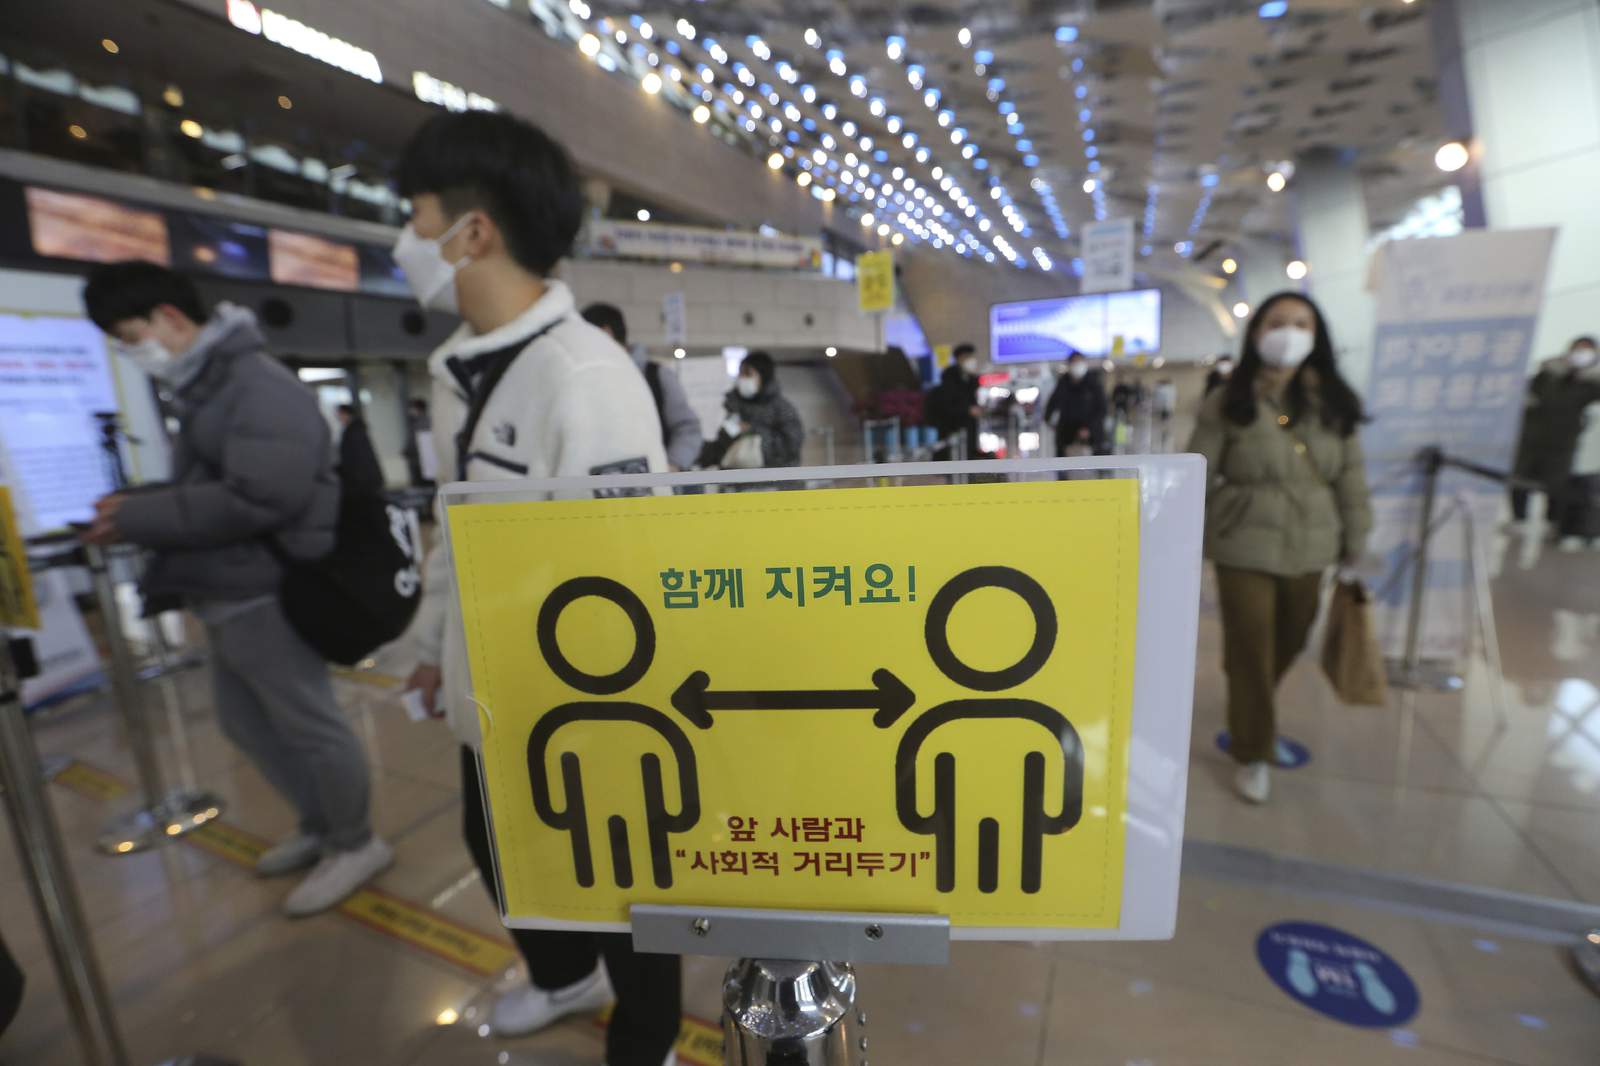 The Latest: Jump in cases worries S. Korea as holiday starts